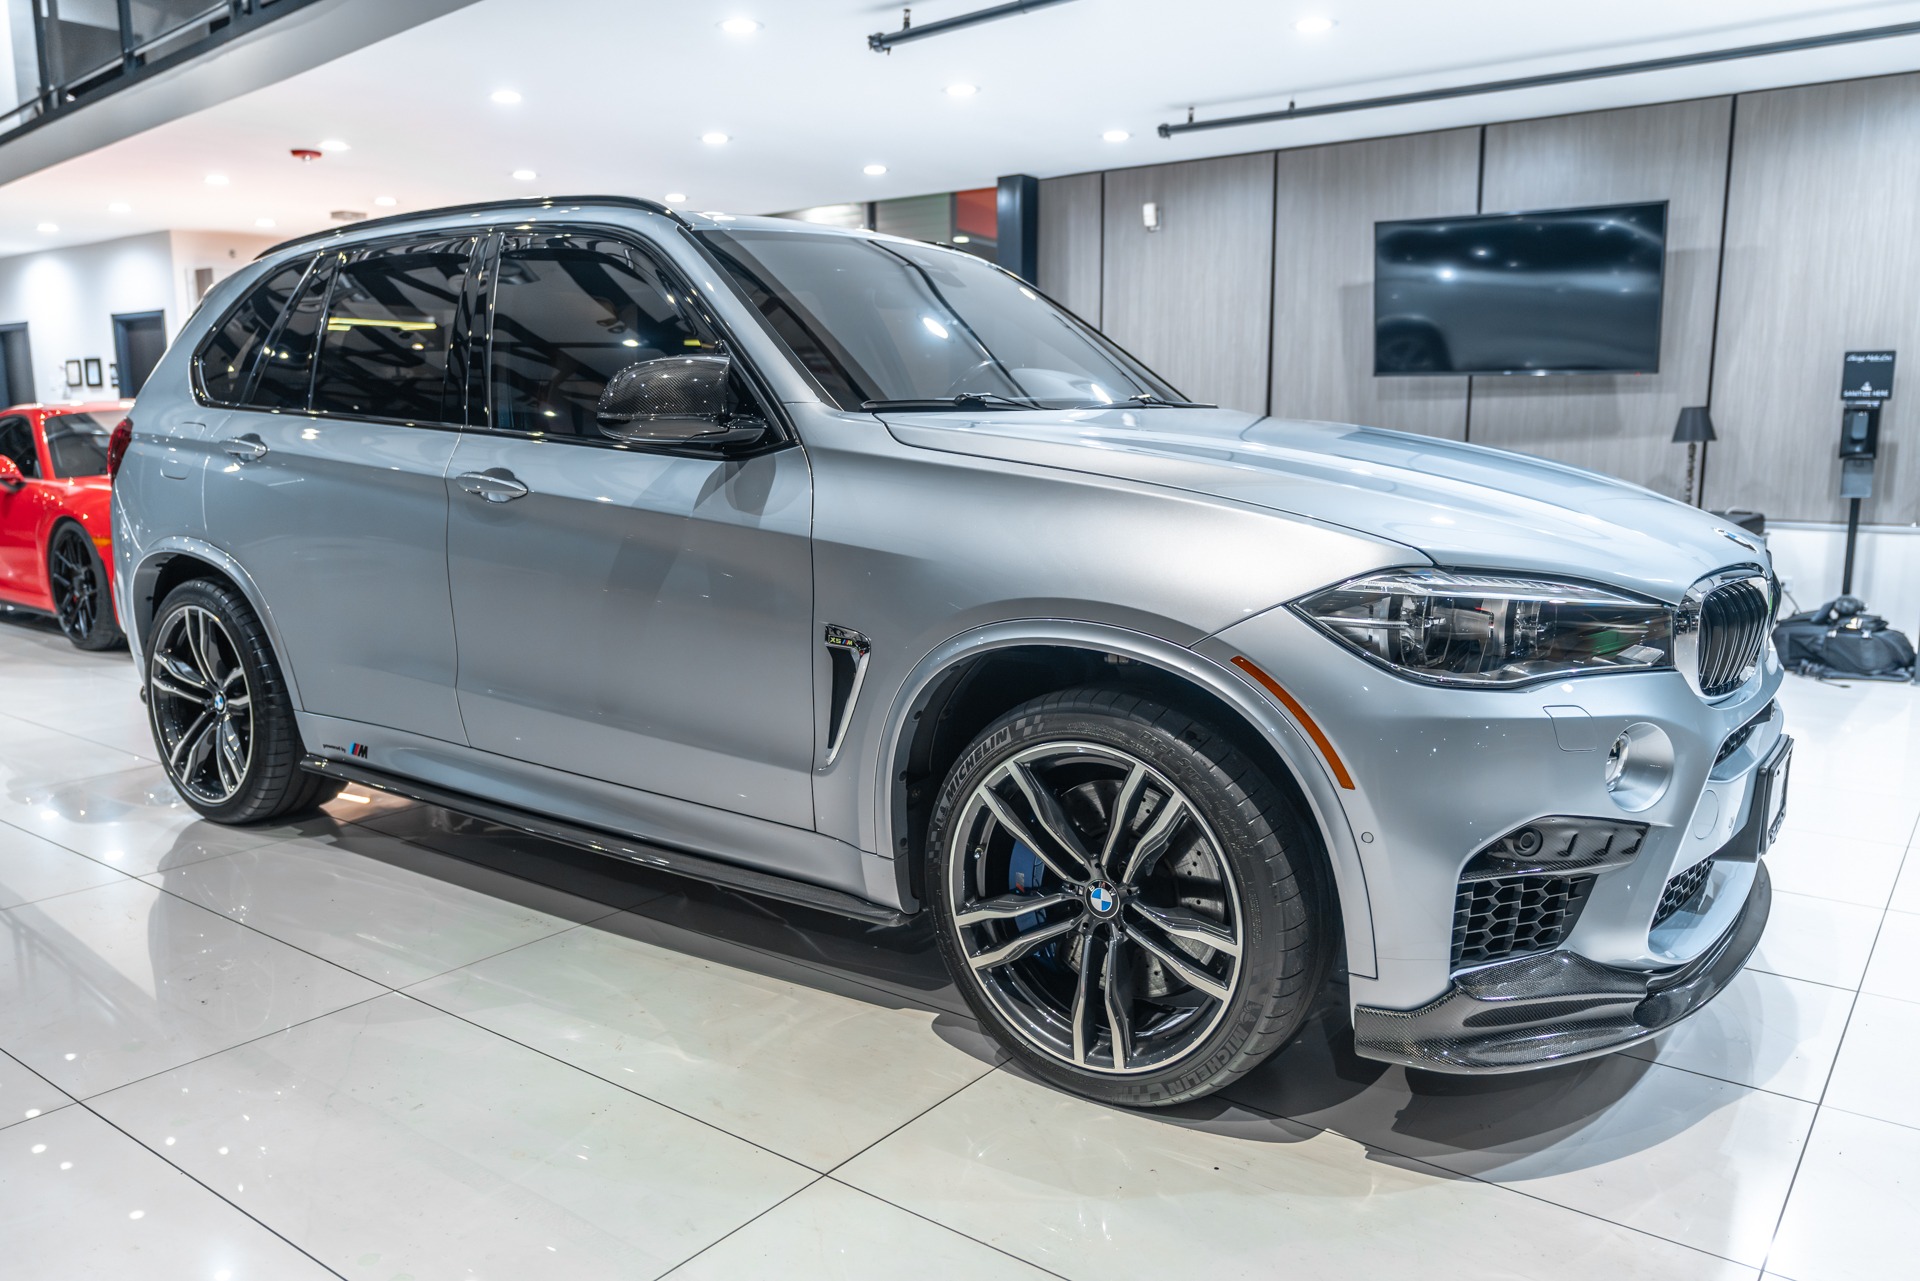 Used-2018-BMW-X5-M-SUV-Executive-Package-Full-Merino-Leather-Panoramic-Sunroof-Carbon-Trim